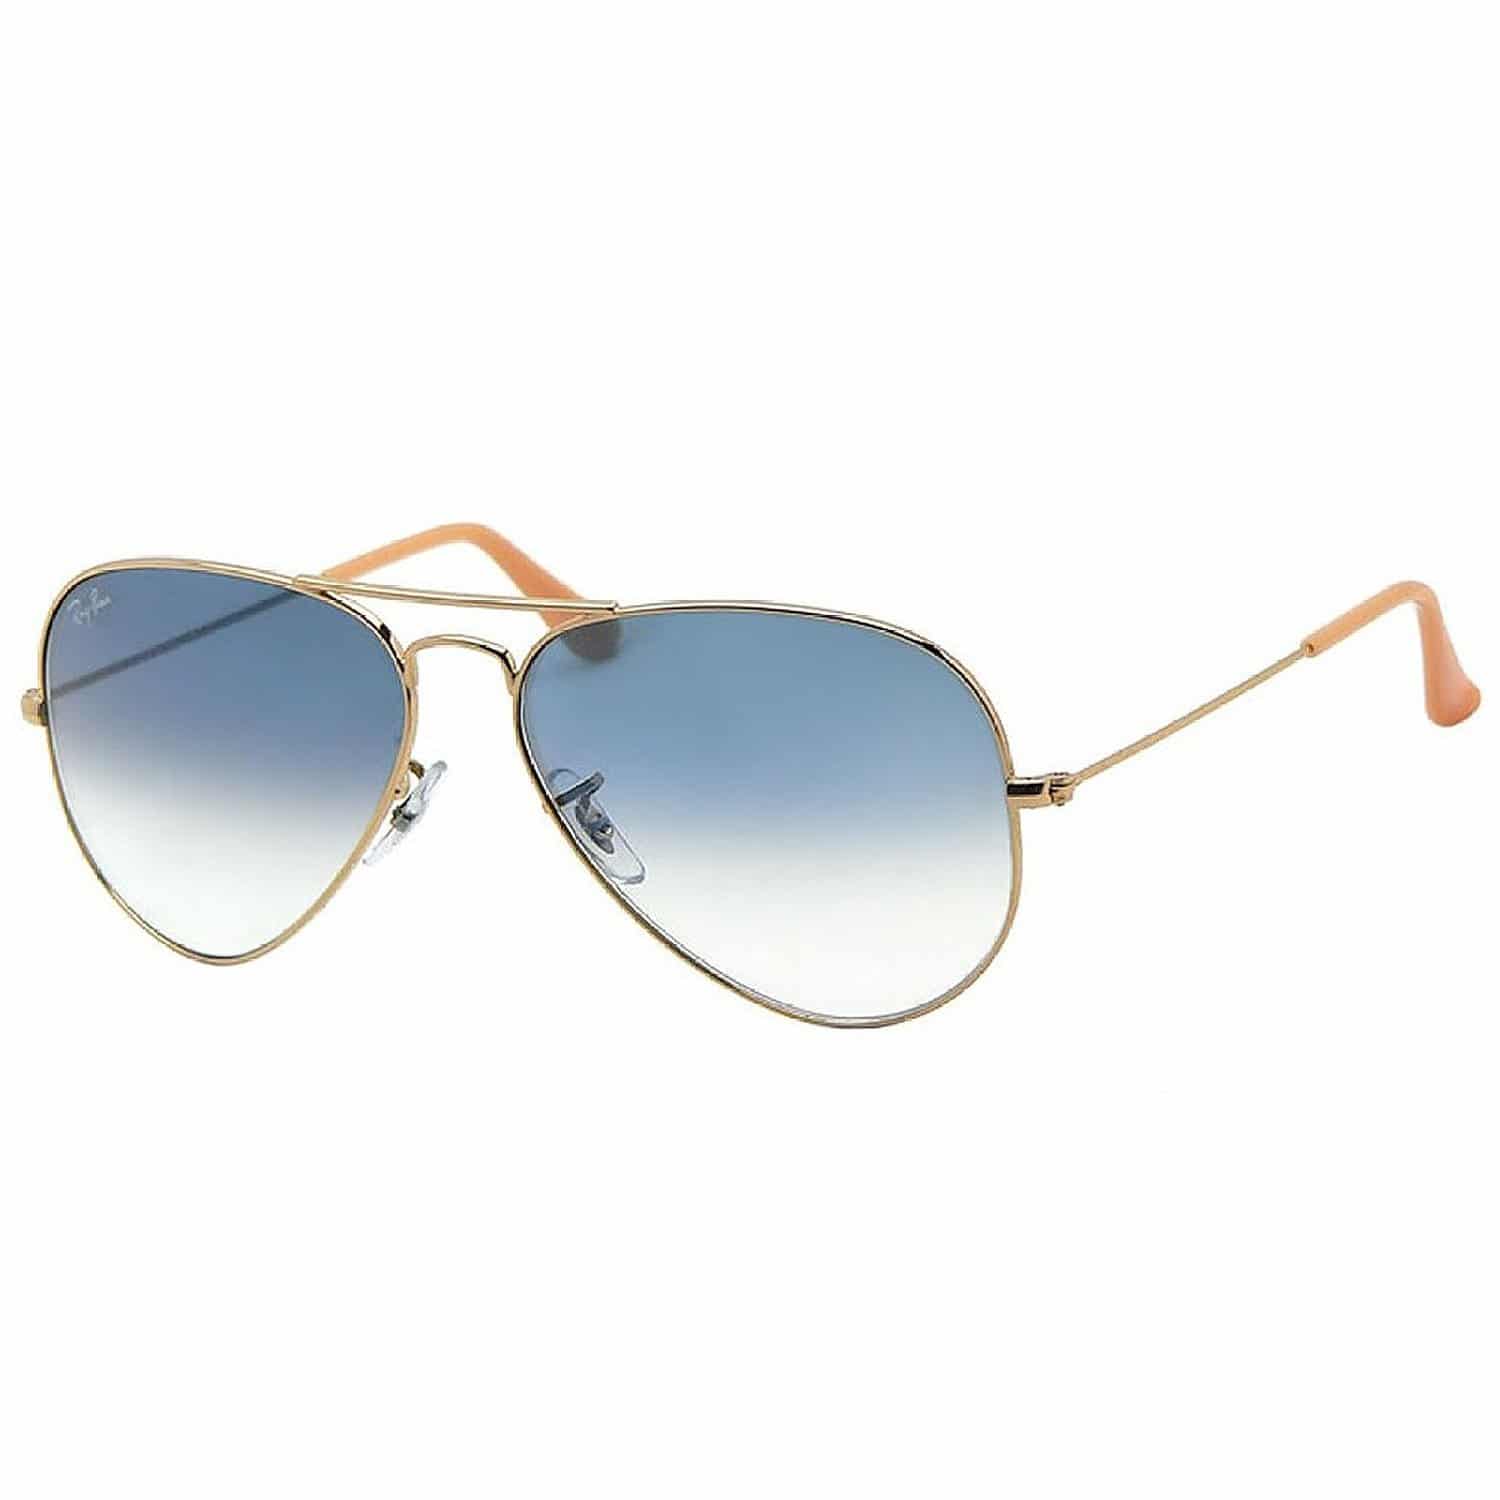 Ray-Ban aviator sunglasses - These aviators are true classics! They looked cool on Tom Cruise in Top Gun and will make your guy look cool too! 